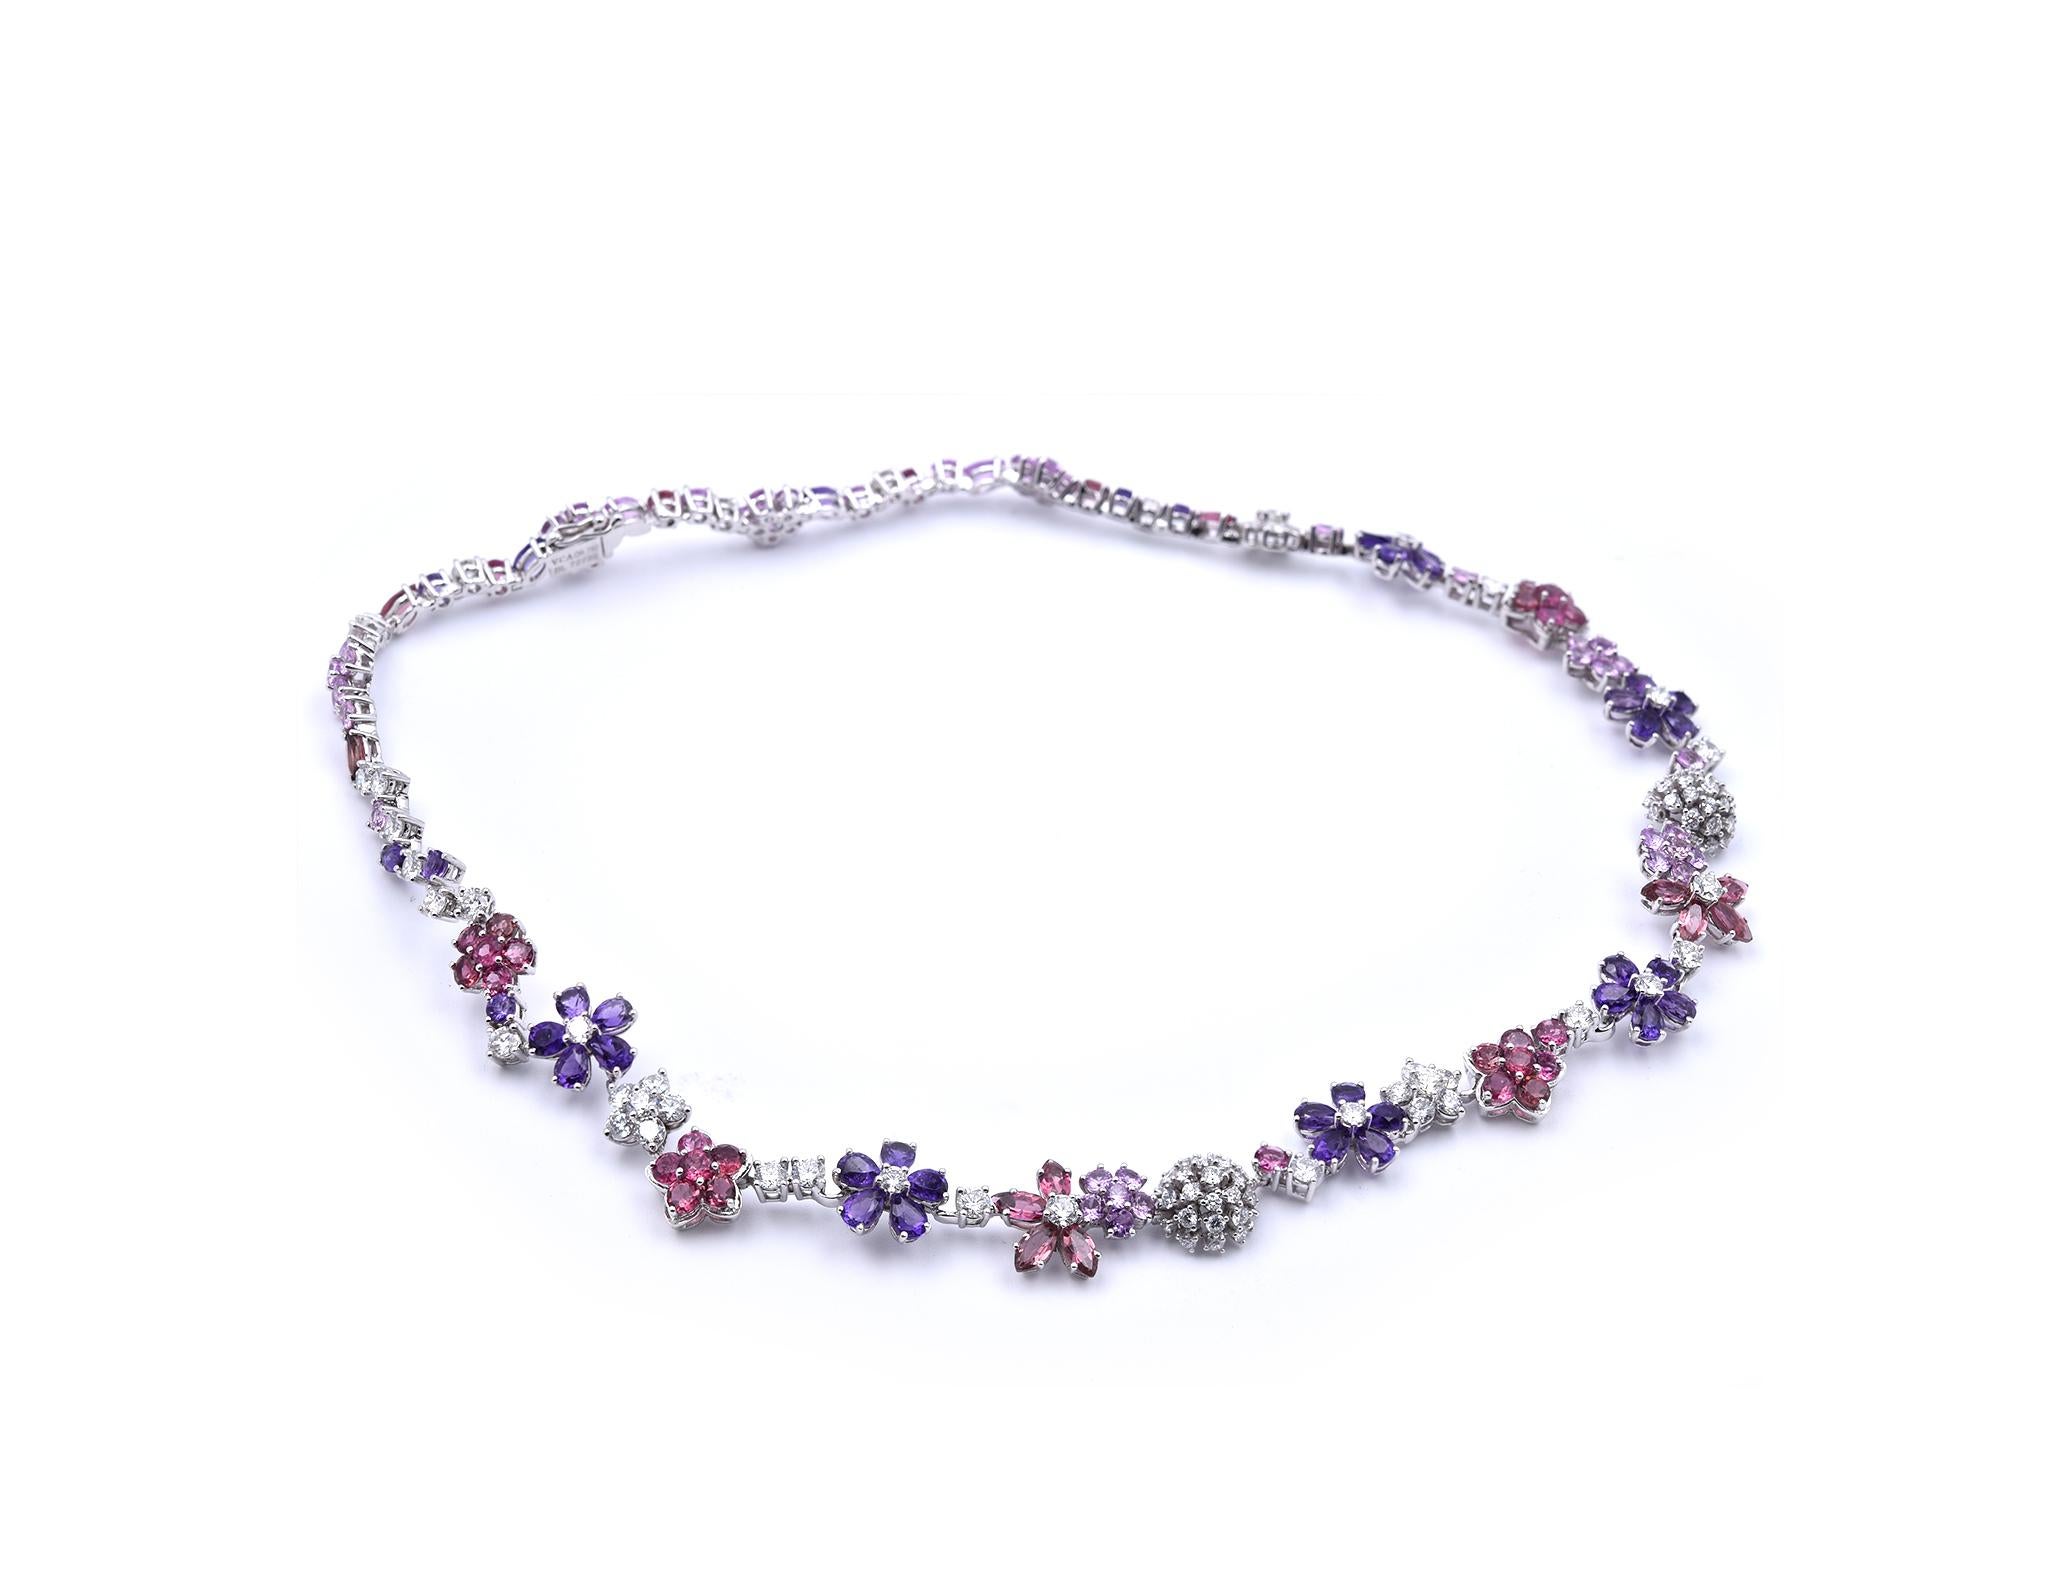 Designer: Van Cleef & Arpels
Material: 18k white gold
Sapphires: 127 mauve and pink sapphires = 23.64cttw
Diamonds: 103 round brilliant cuts = 6.9cttw
Color: G
Clarity: VS
Dimensions: necklace measures 14.5-inches in length
Weight: 26.94 grams
